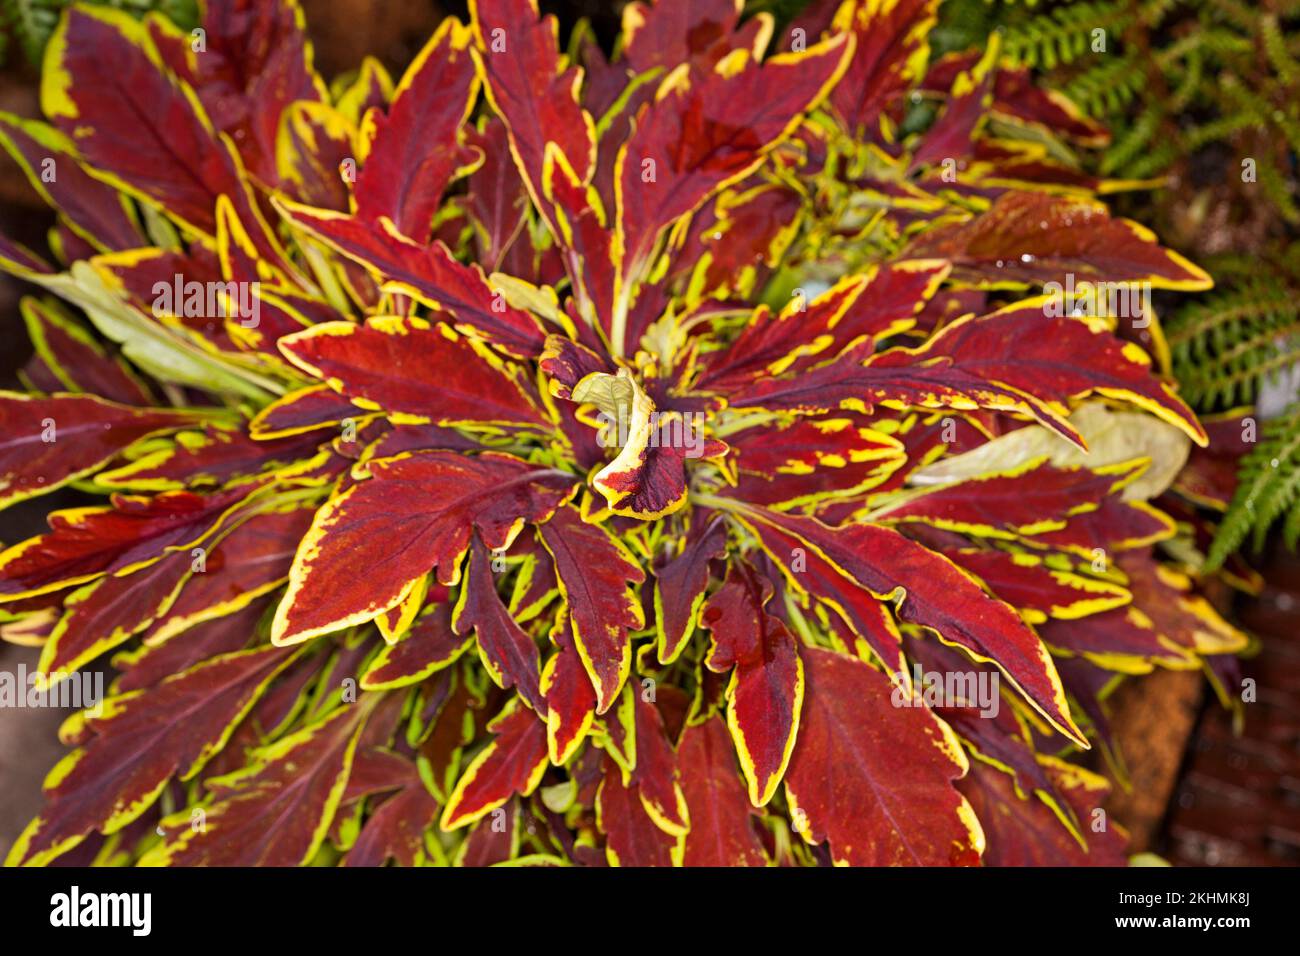 Cluster of stunning vivid red leaves hemmed with gold of Solenostemon scutellarioides 'Le Freak', Coleus, an evergreen perennial plant Stock Photo